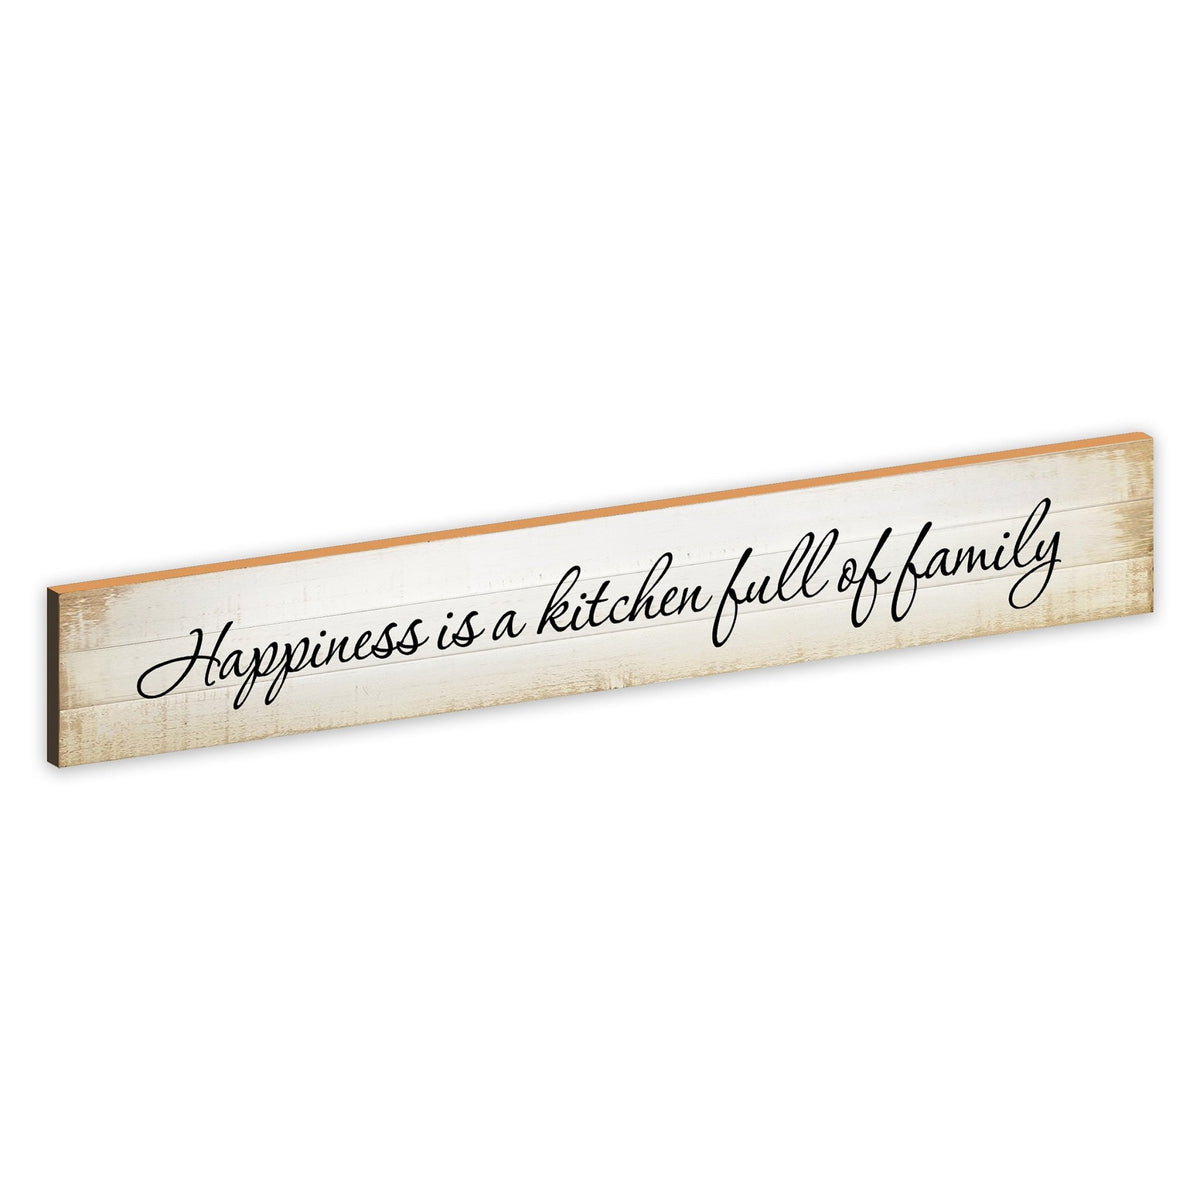 Vintage Wooden Kitchen Wall Plaque For Home Décor And Gift Ideas - Happiness Is A Kitchen Full Of Family - LifeSong Milestones